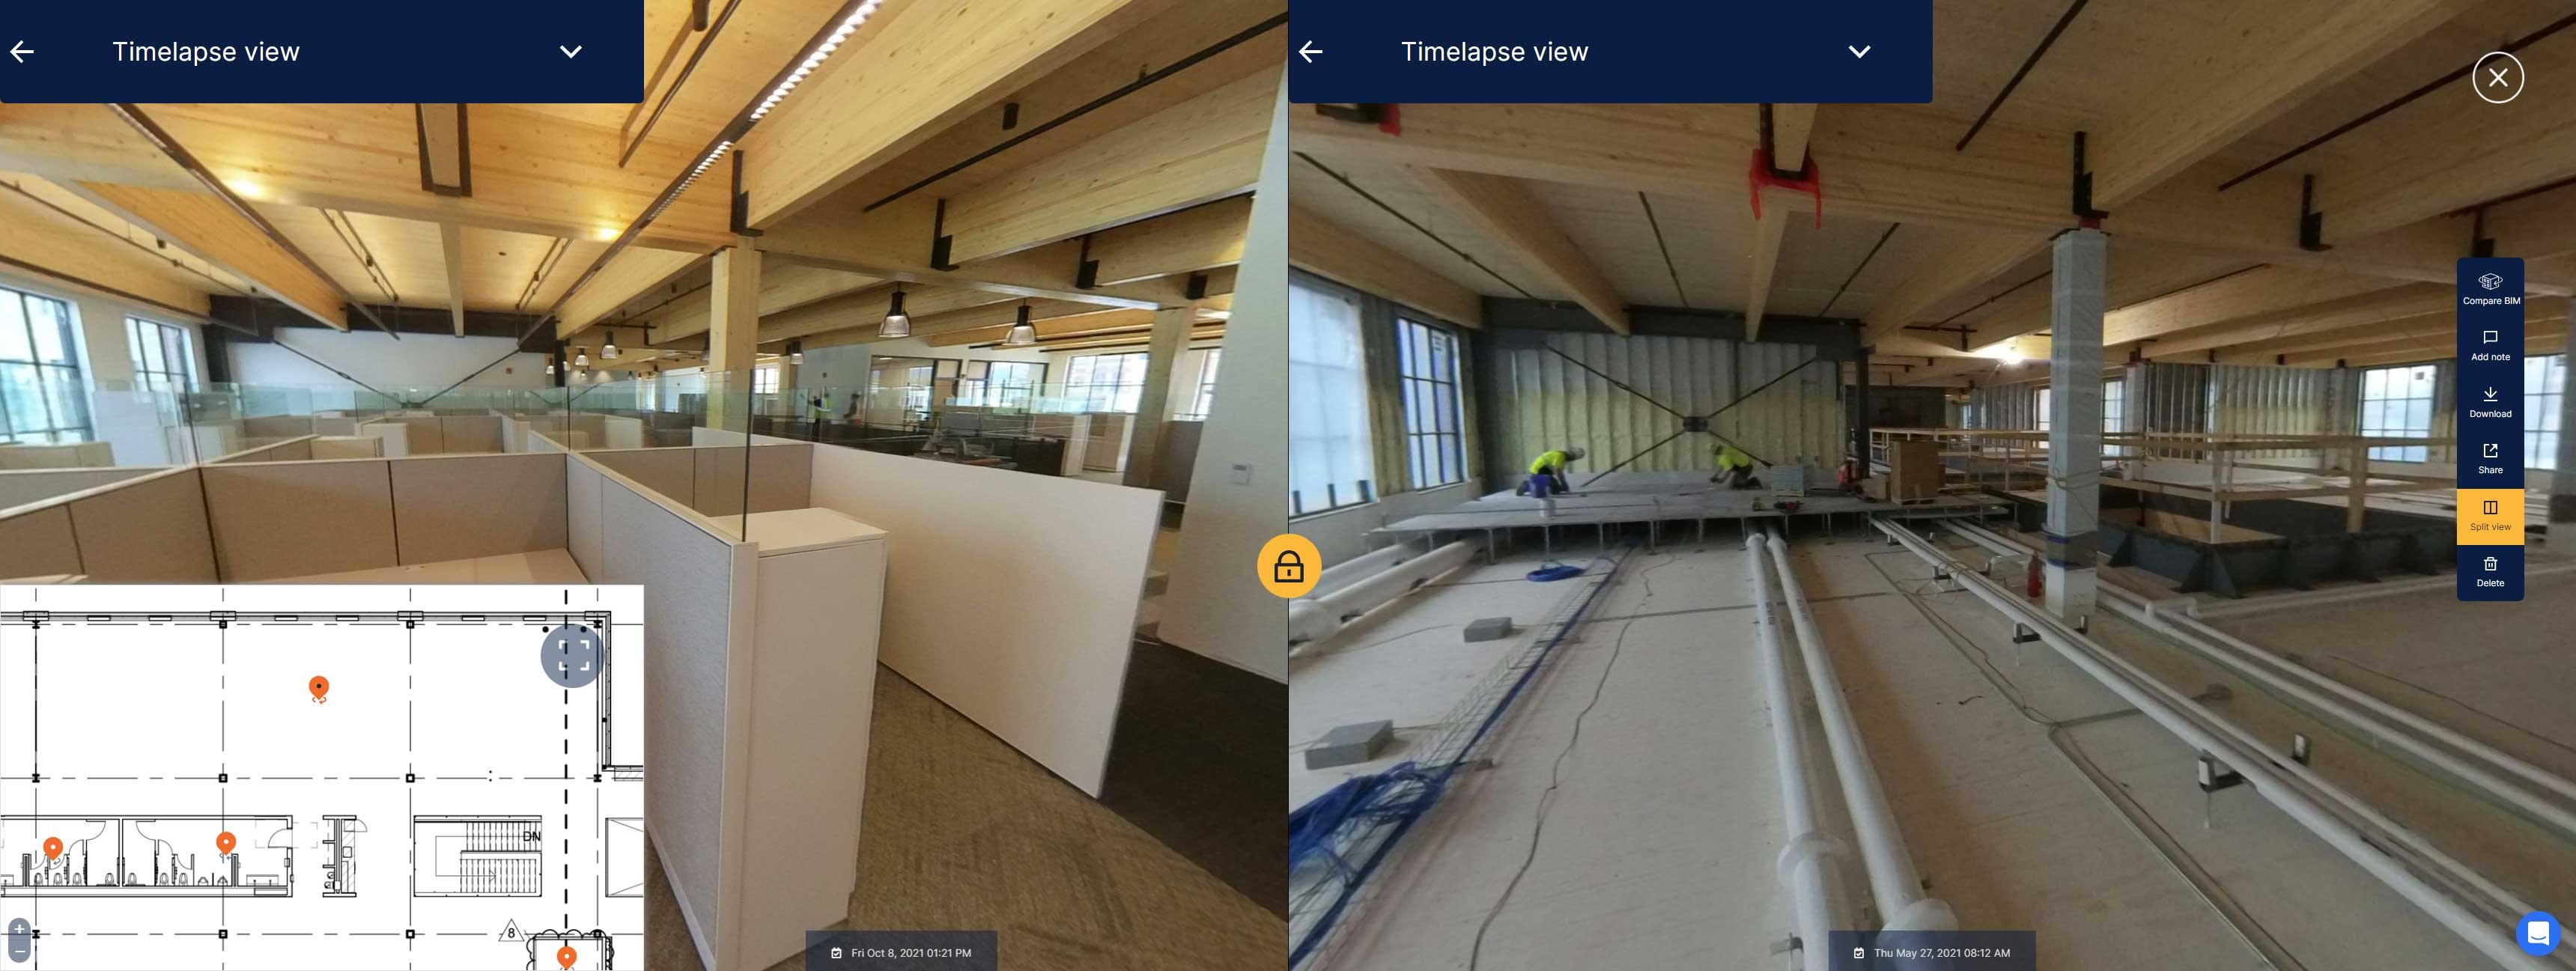 Side-by-side timelapse view of interior office construction in StructionSite to reveal as-built components after covered